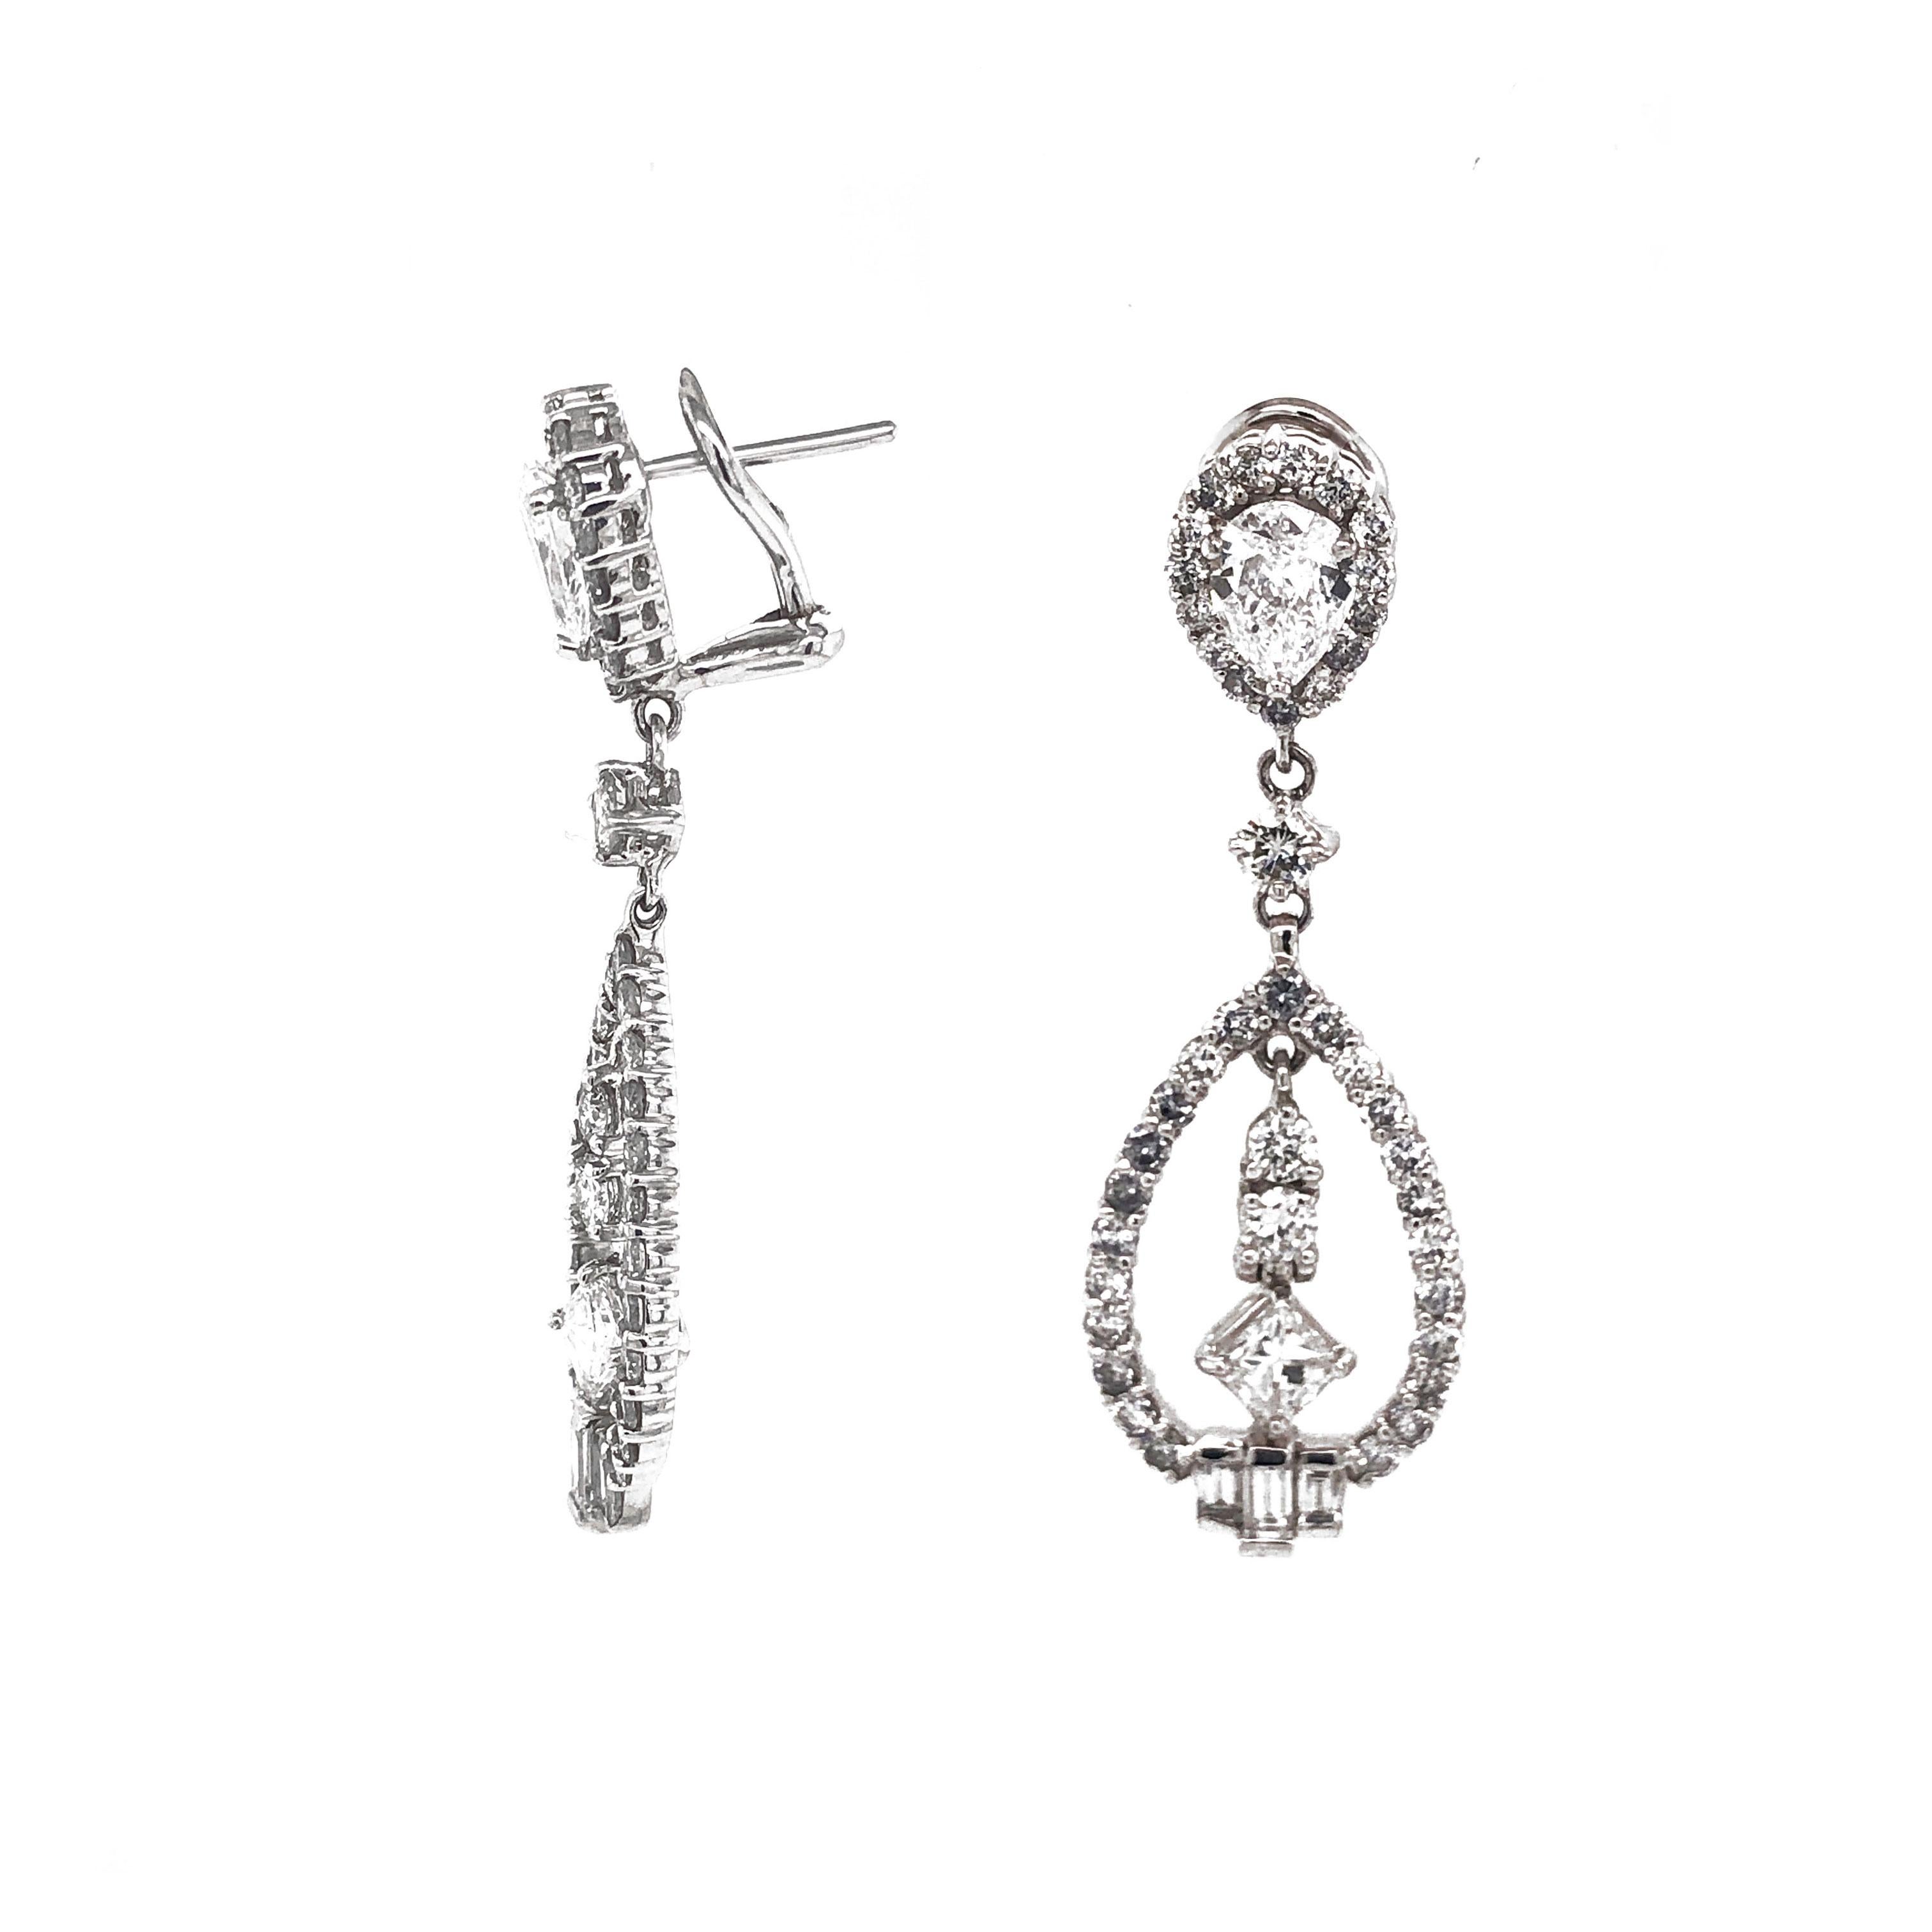 Beautiful classic drop dangling platinum earrings, adorned in white round pear diamonds 1.20 ct total.   
Accented by round and square cut diamonds 3.35 carat total.
Diamonds are white and natural in G-H Color Clarity VS.
Platinum 950